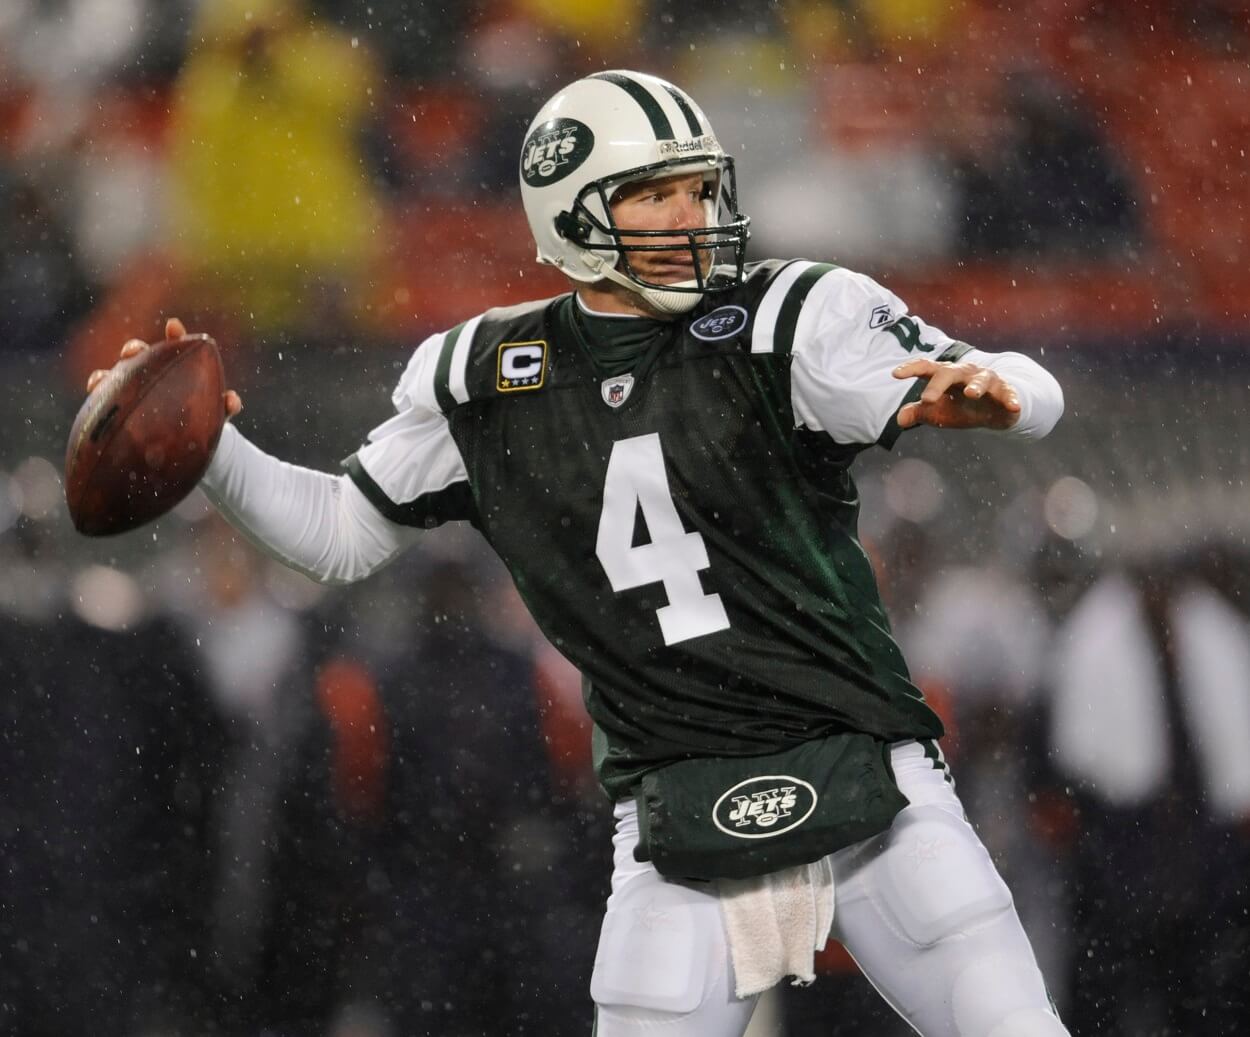 Brett Favre during a Jets-Broncos matchup in 2008